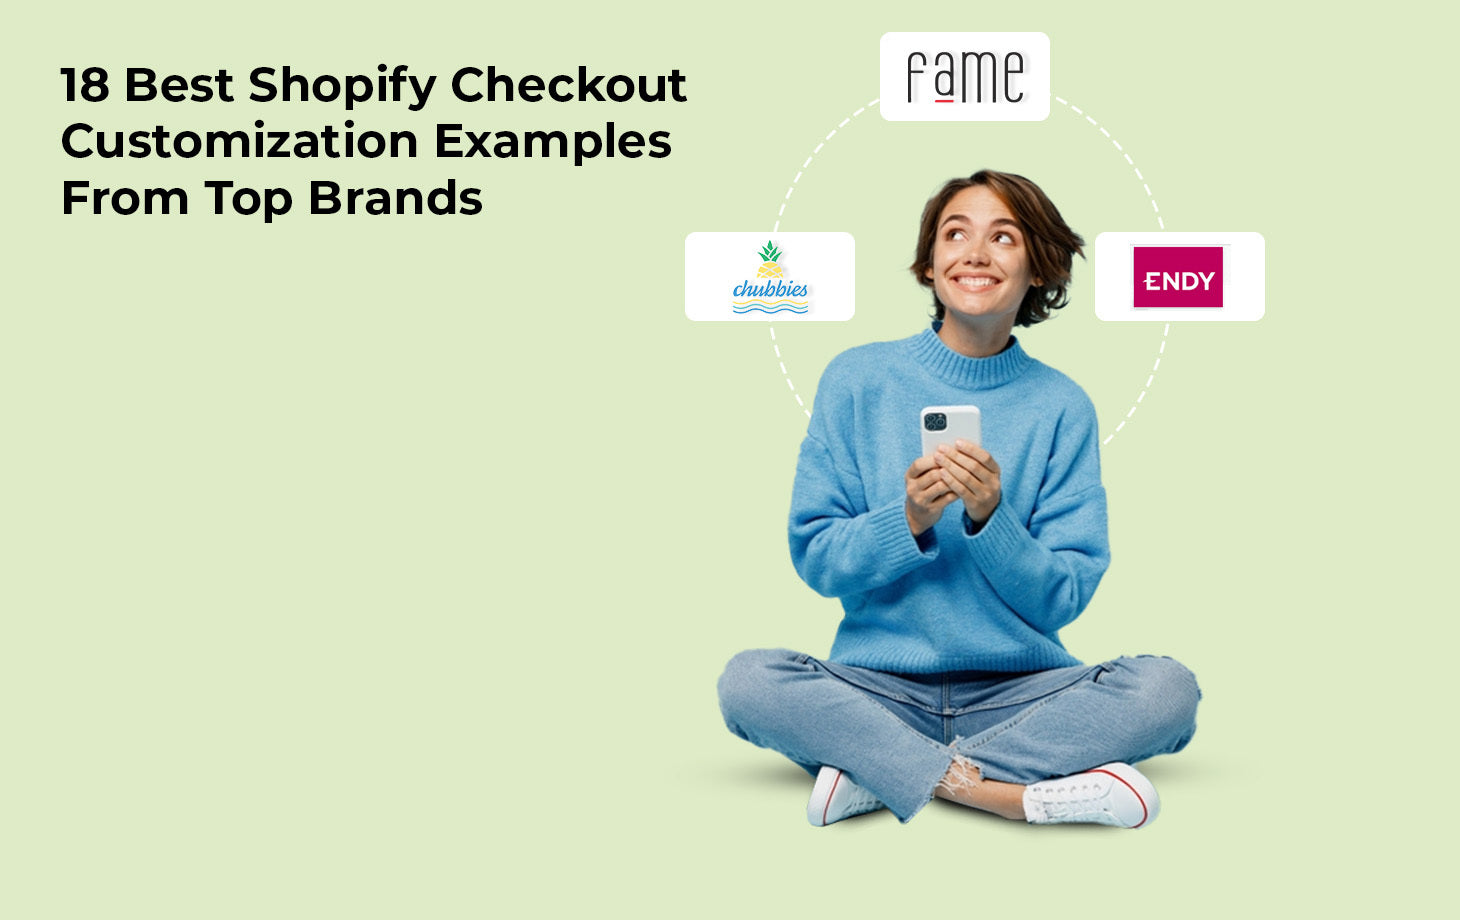 18 Best Shopify Checkout Customization Examples From Top Brands